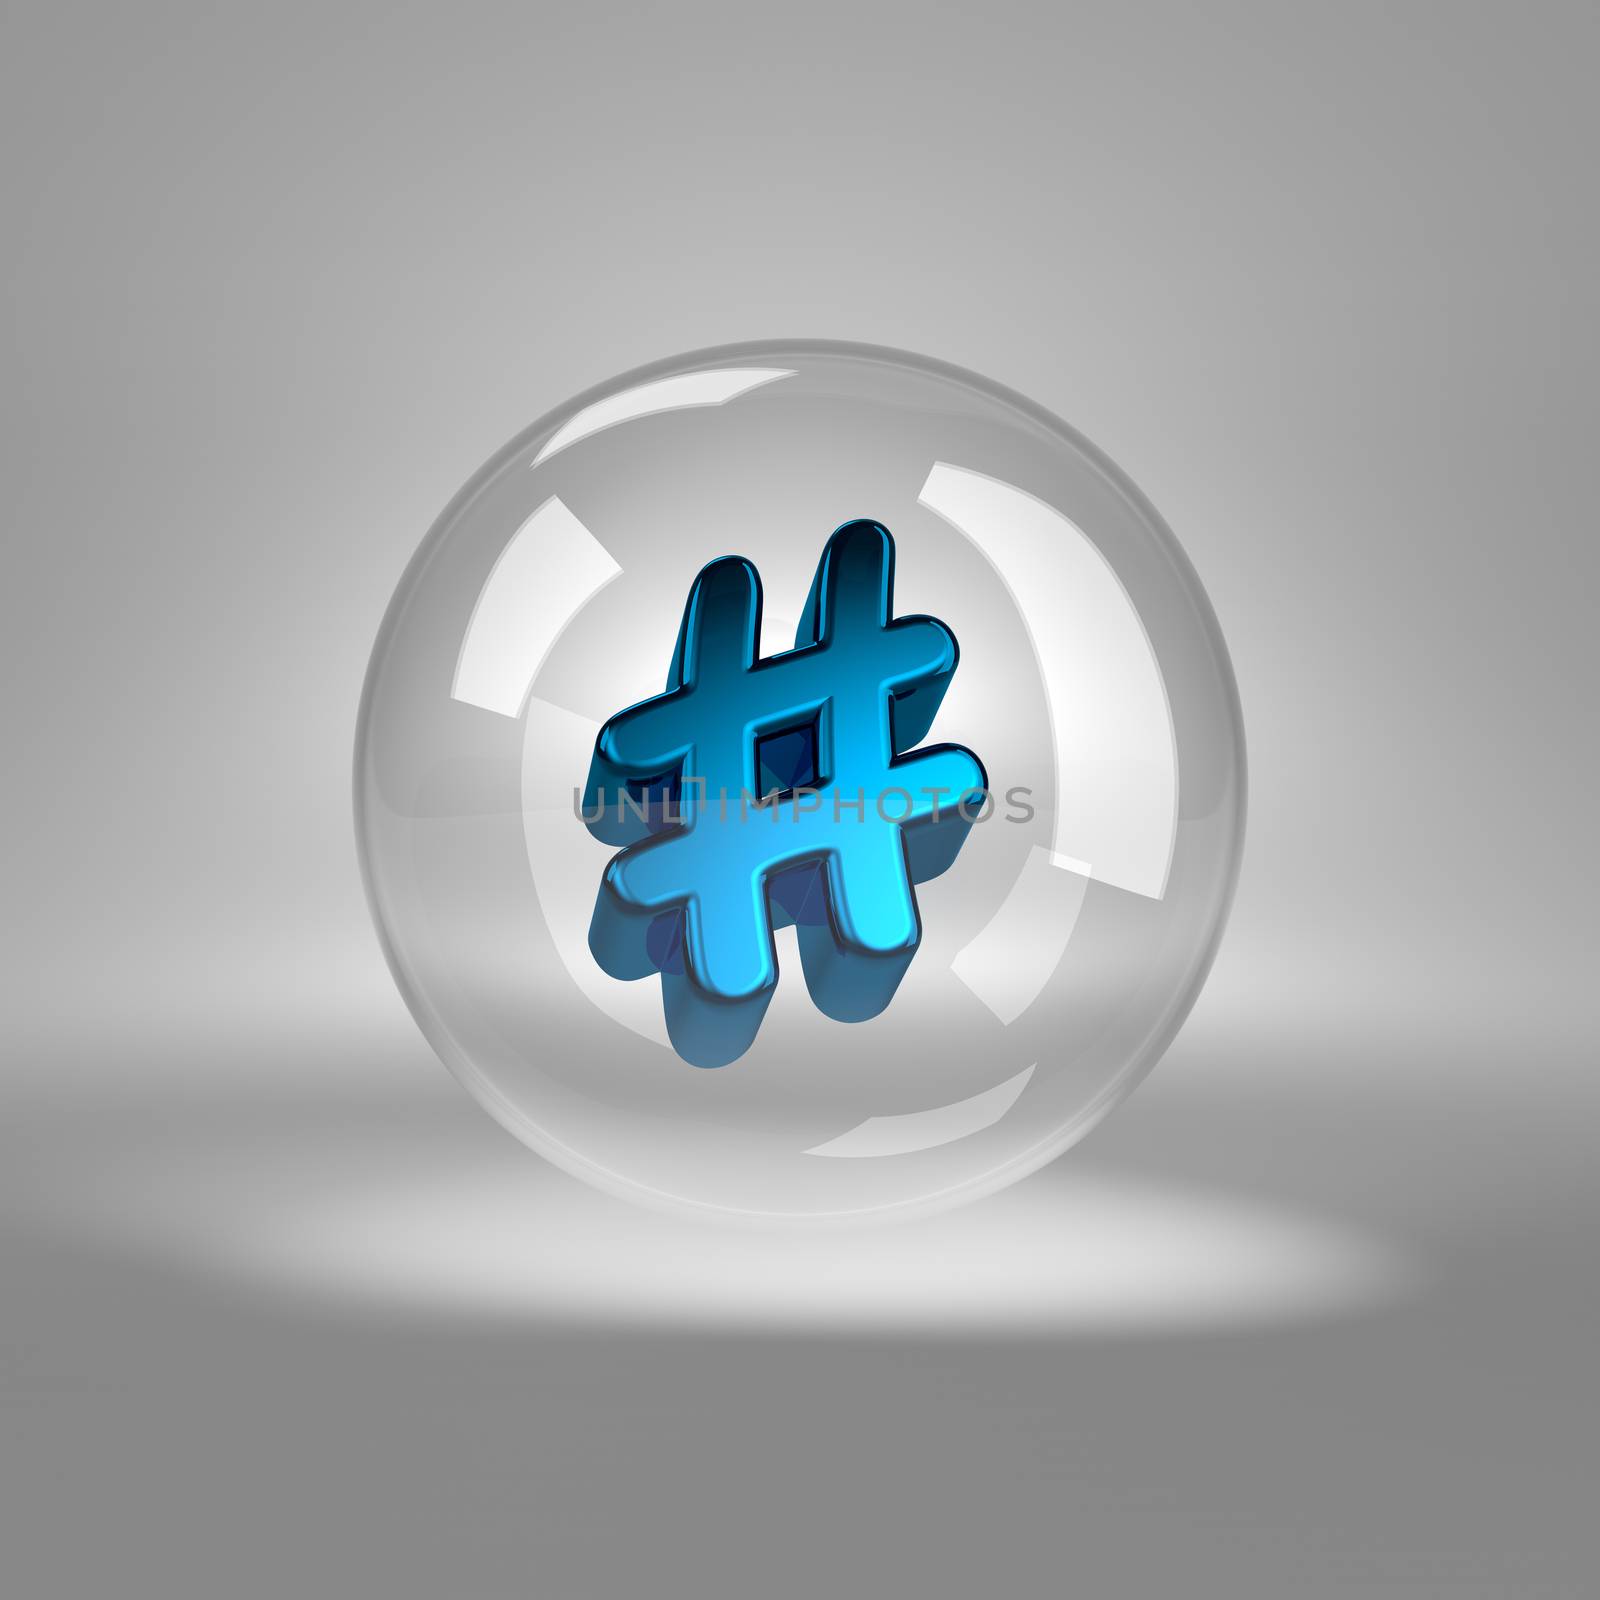 Hashtag Symbol in Glass Bubble by make